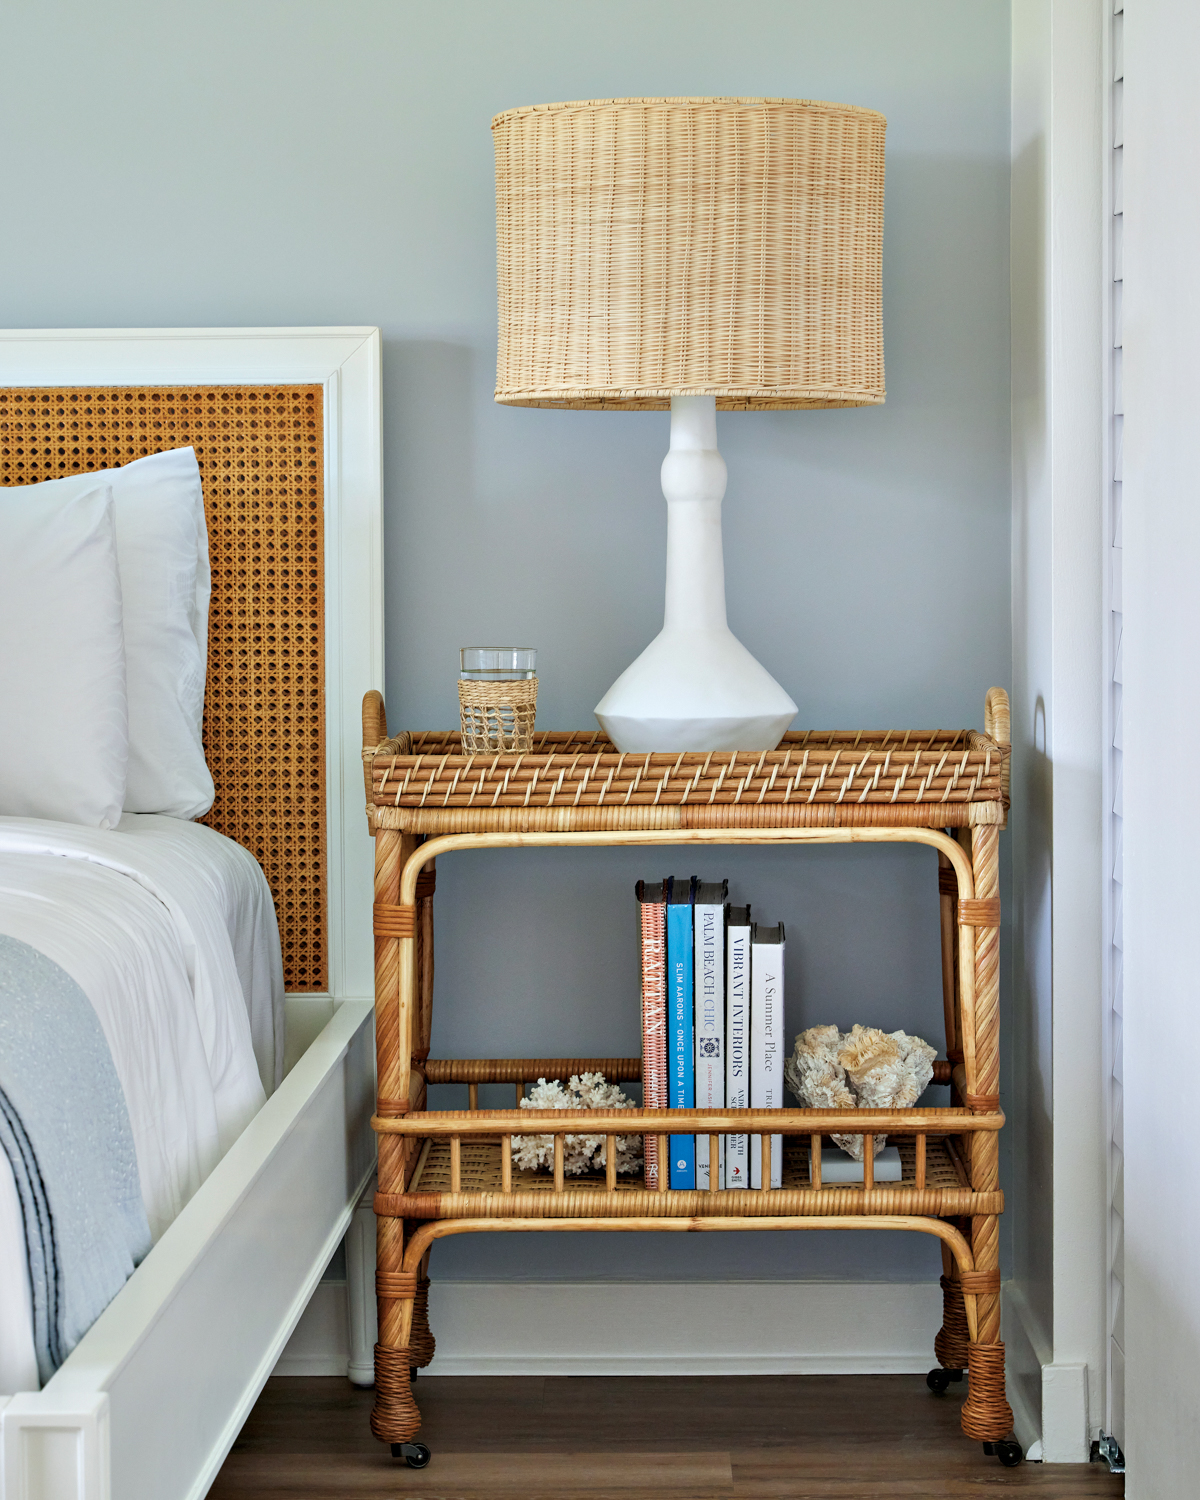 Table lamp with a wicker shade on a wicker side cart next to a white cane pattern bed by Serena & Lily